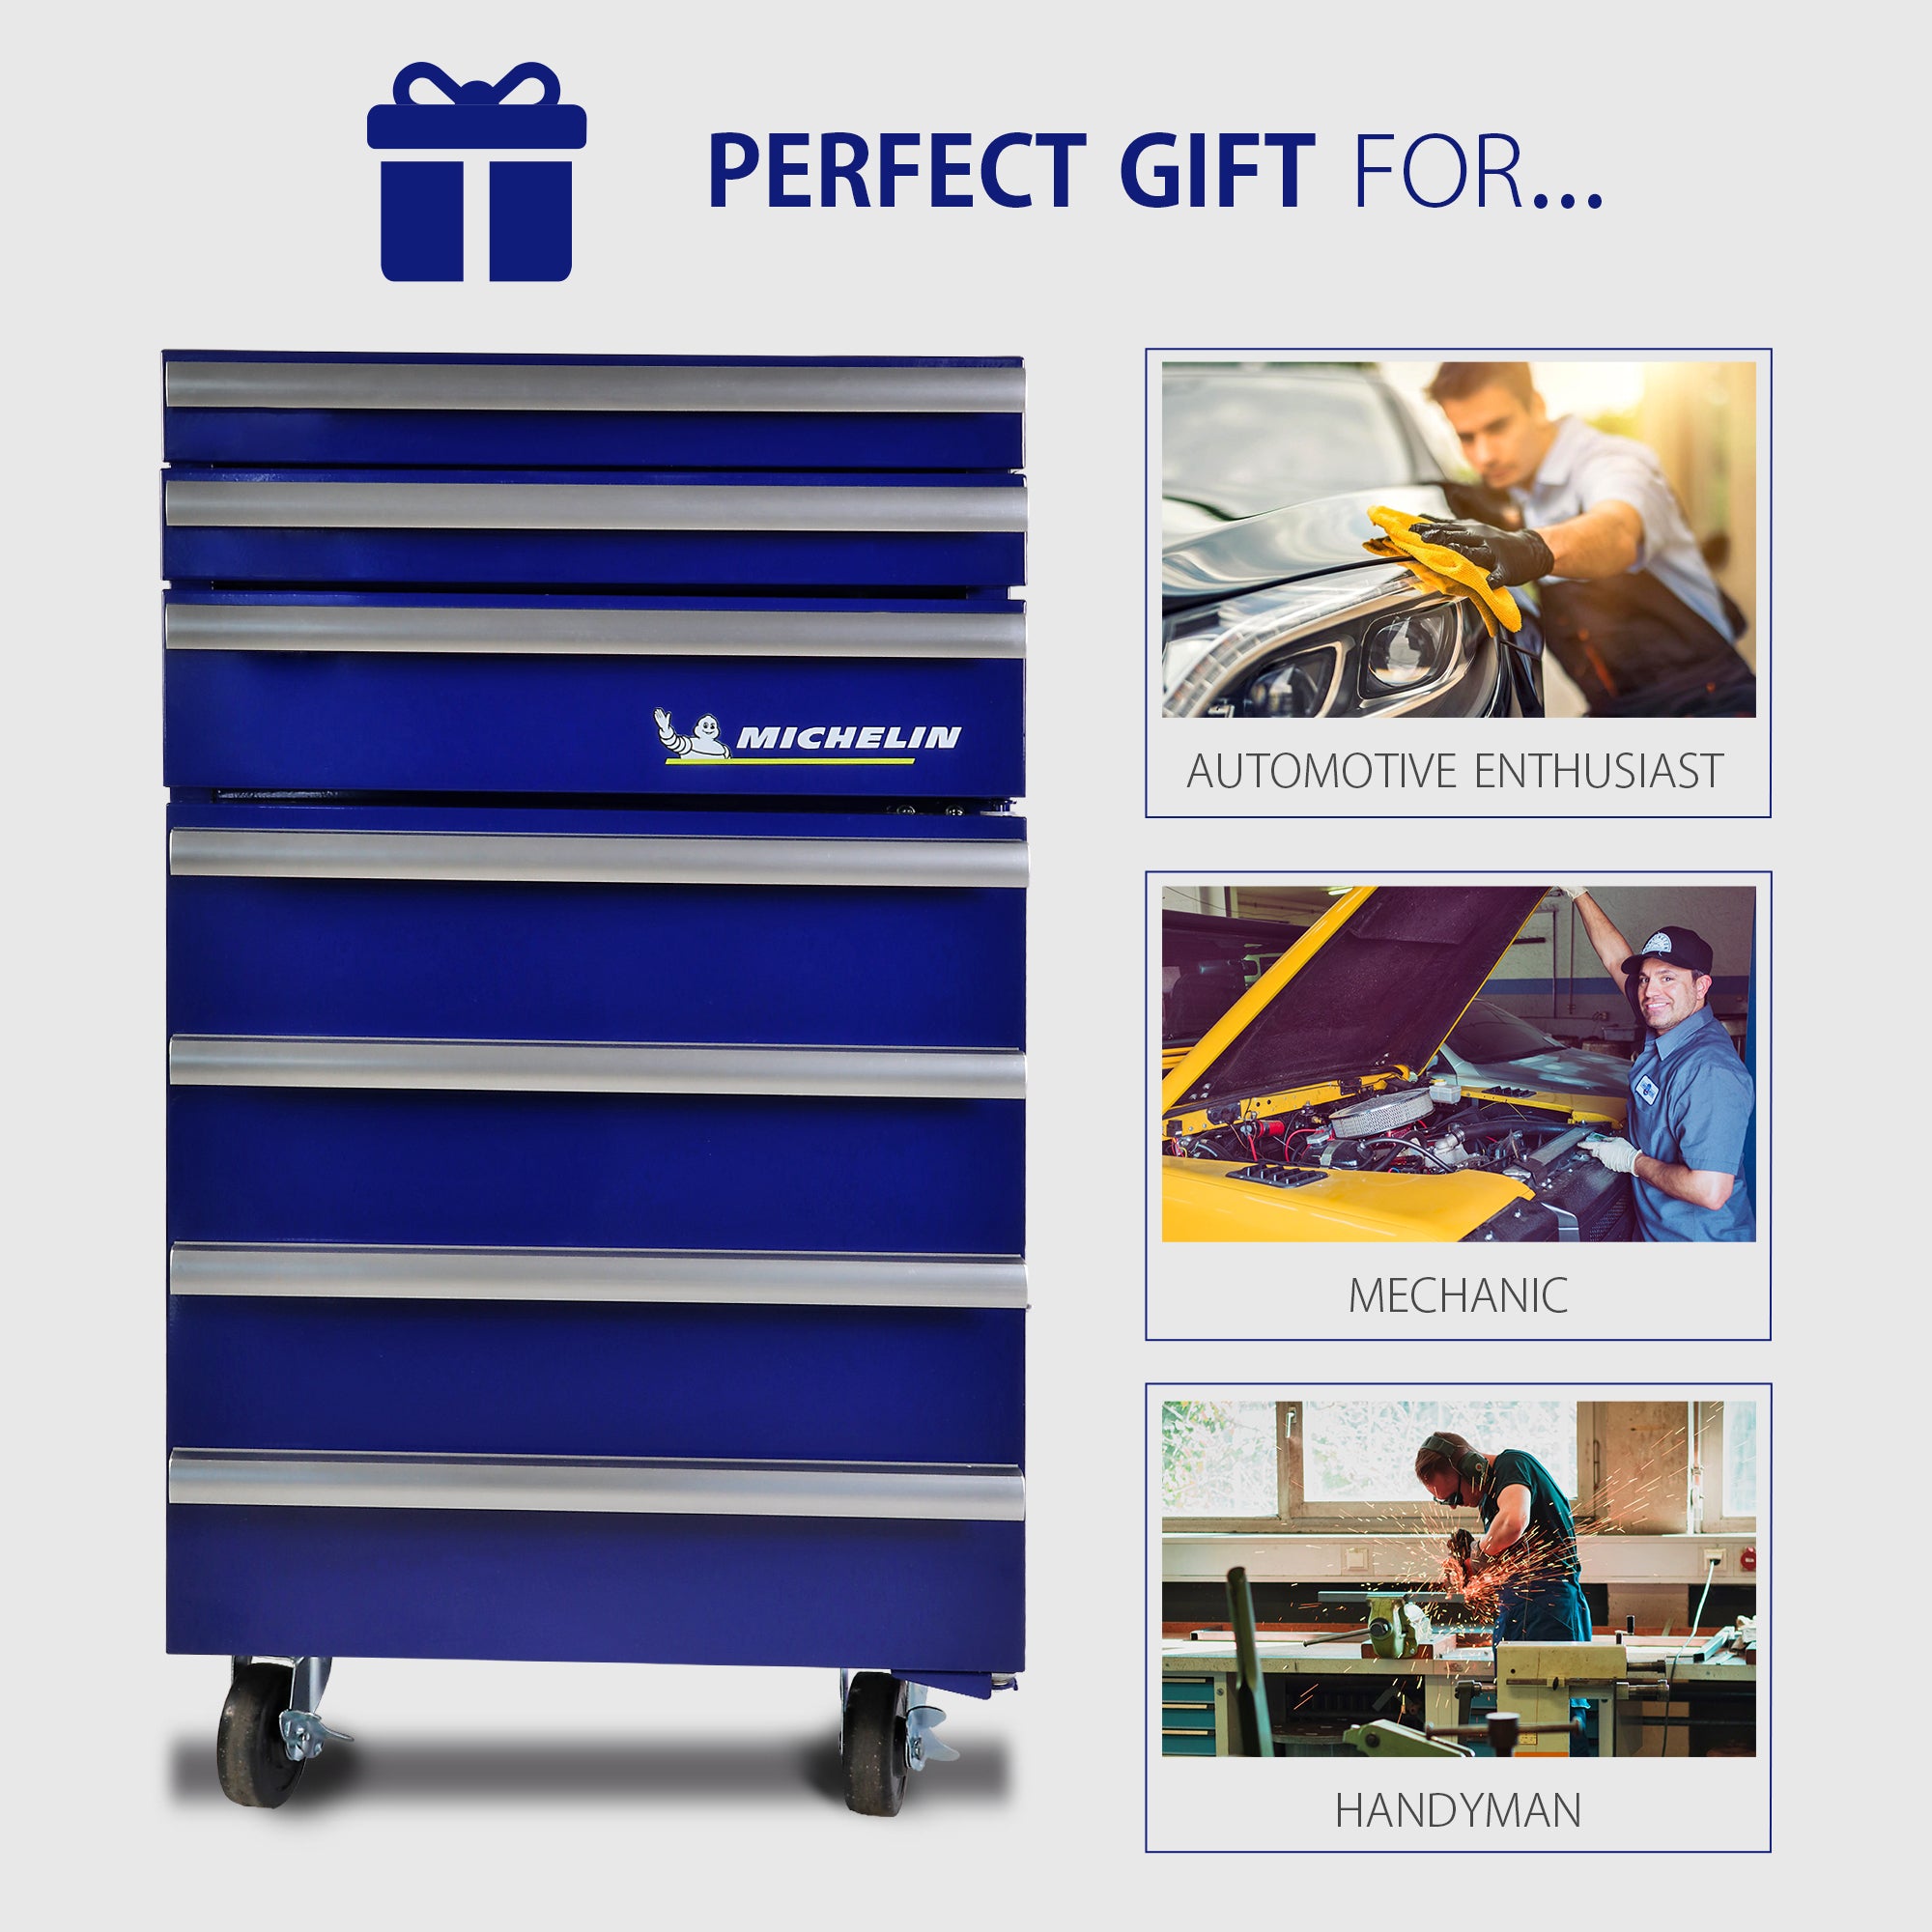 On the left is a picture of the Michelin blue tool box refrigerator with text above reading, "Perfect gift for…" and on the right are three images, each showing a person in a setting where the fridge could be used, labeled, "automotive enthusiast," "mechanic," and "handyman"